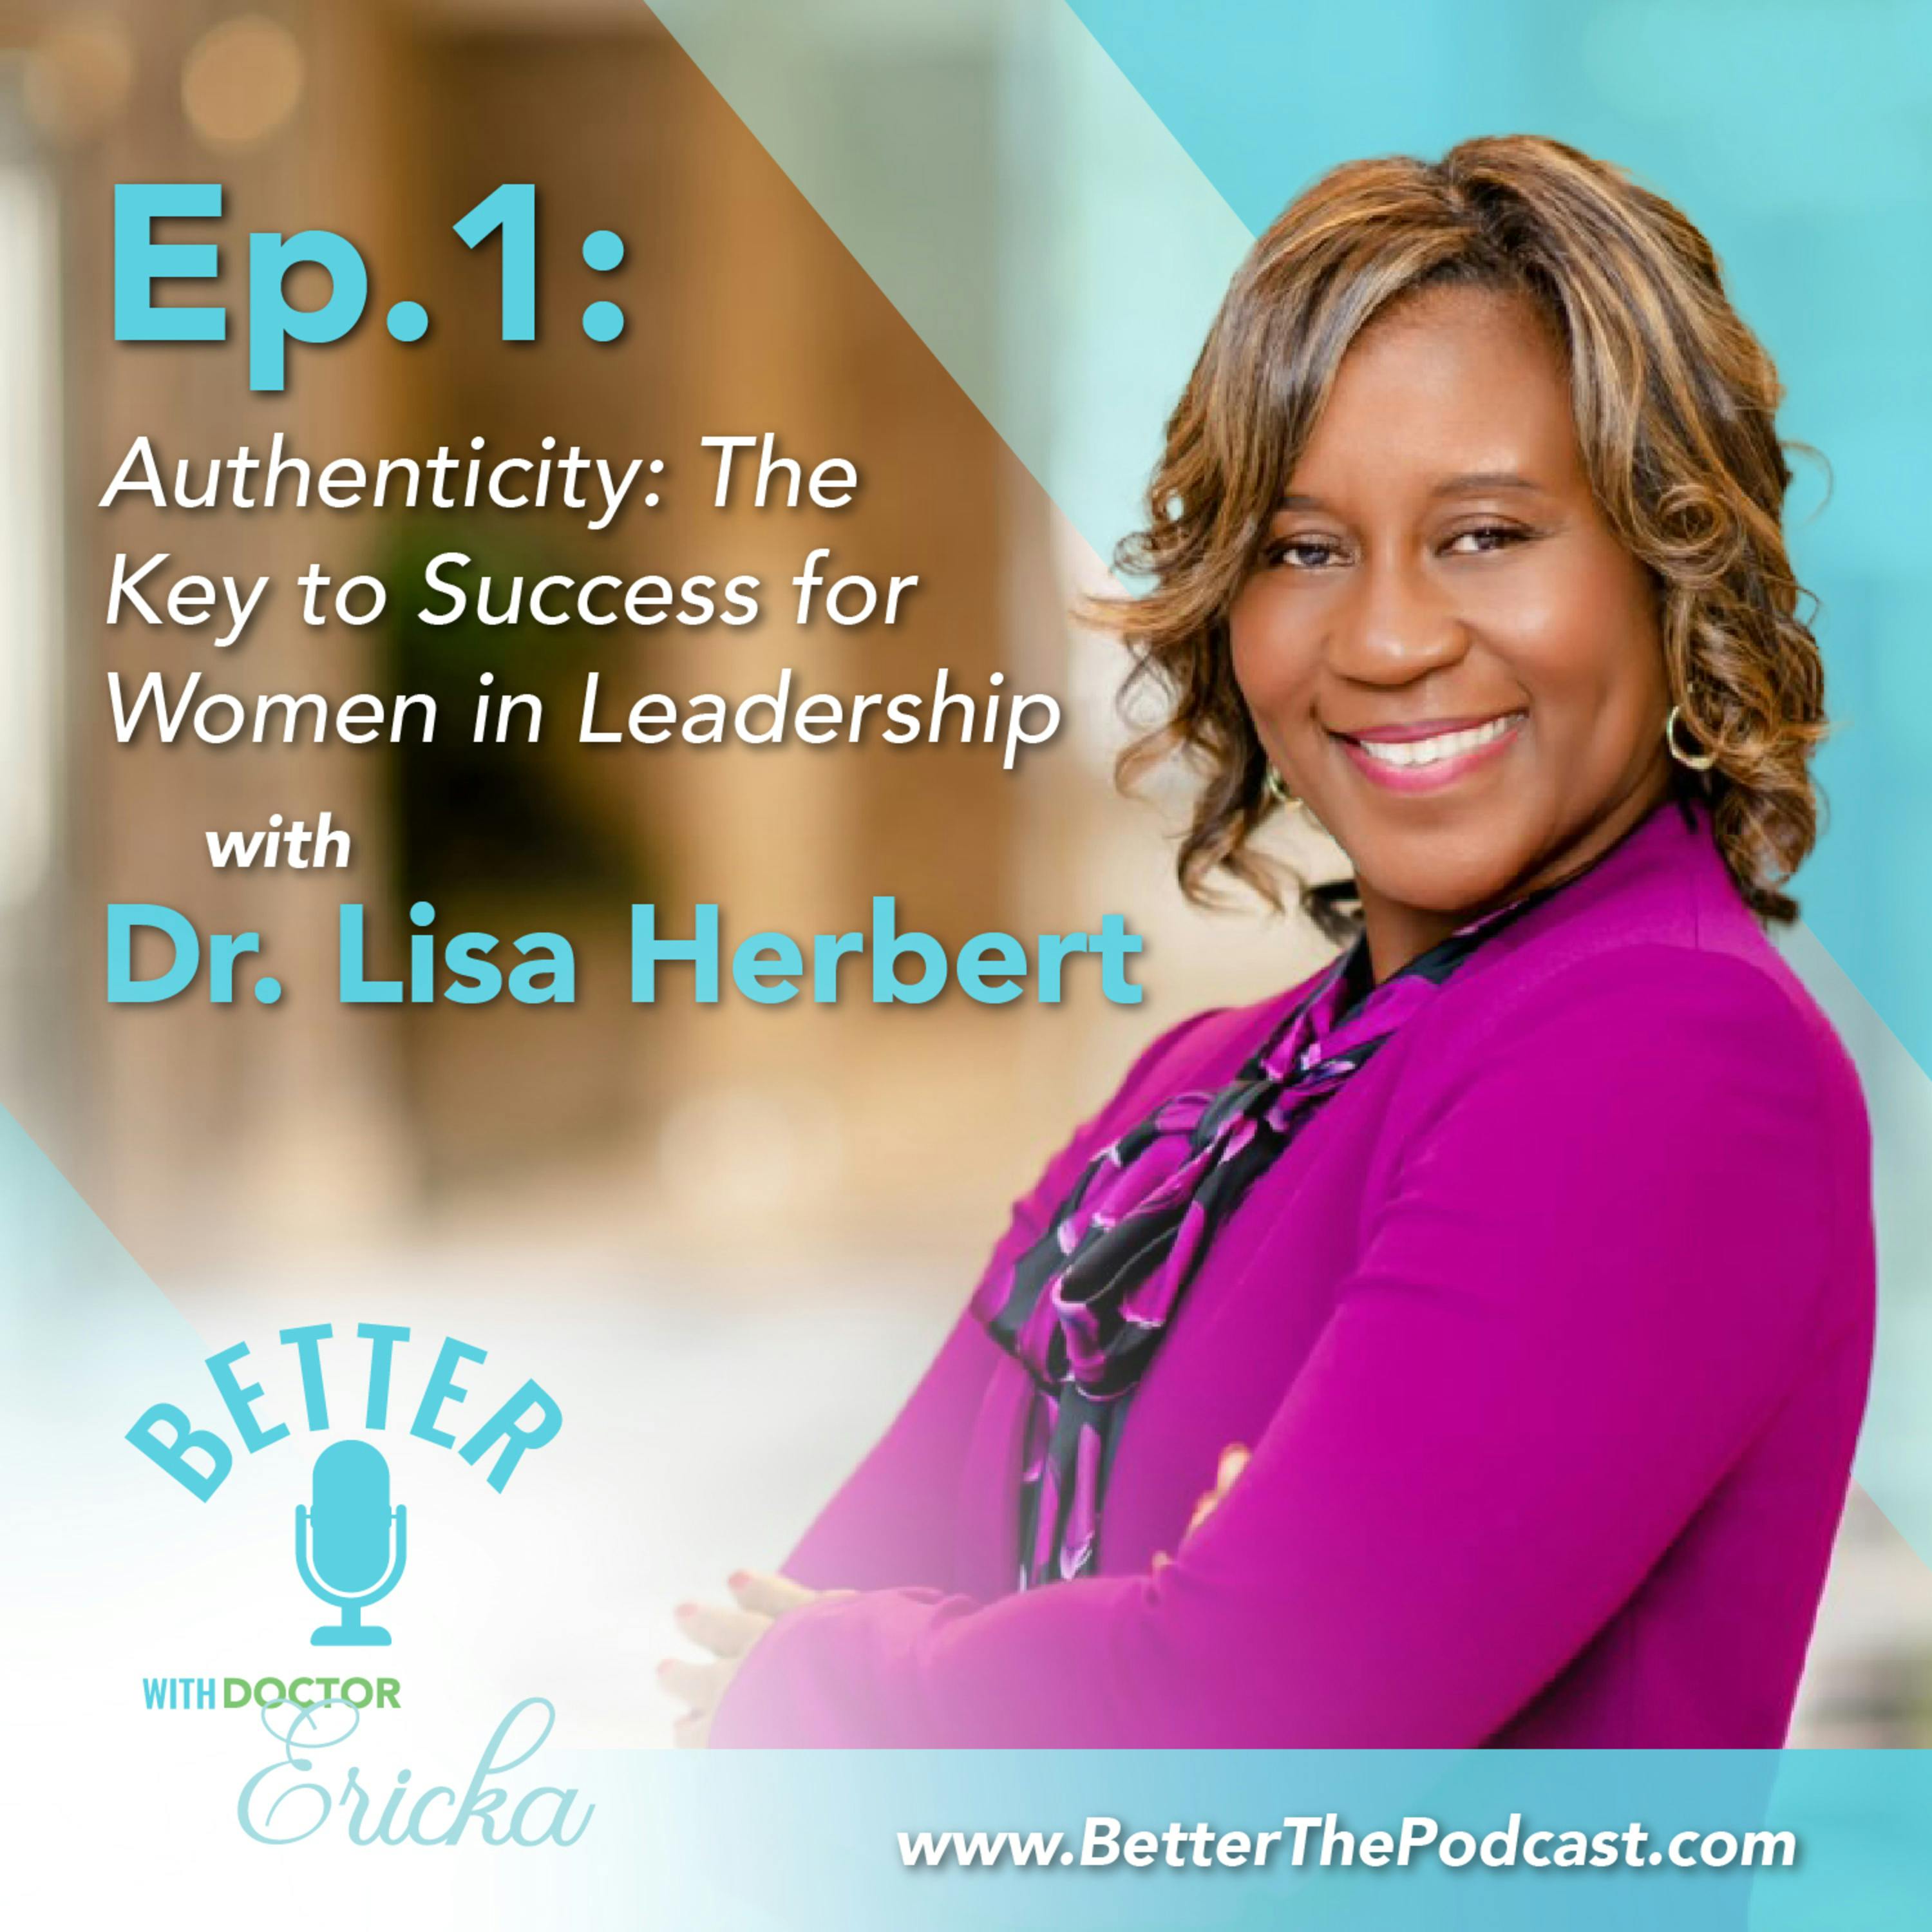 Authenticity: The Key to Success for Women in Leadership with Dr. Lisa Herbert